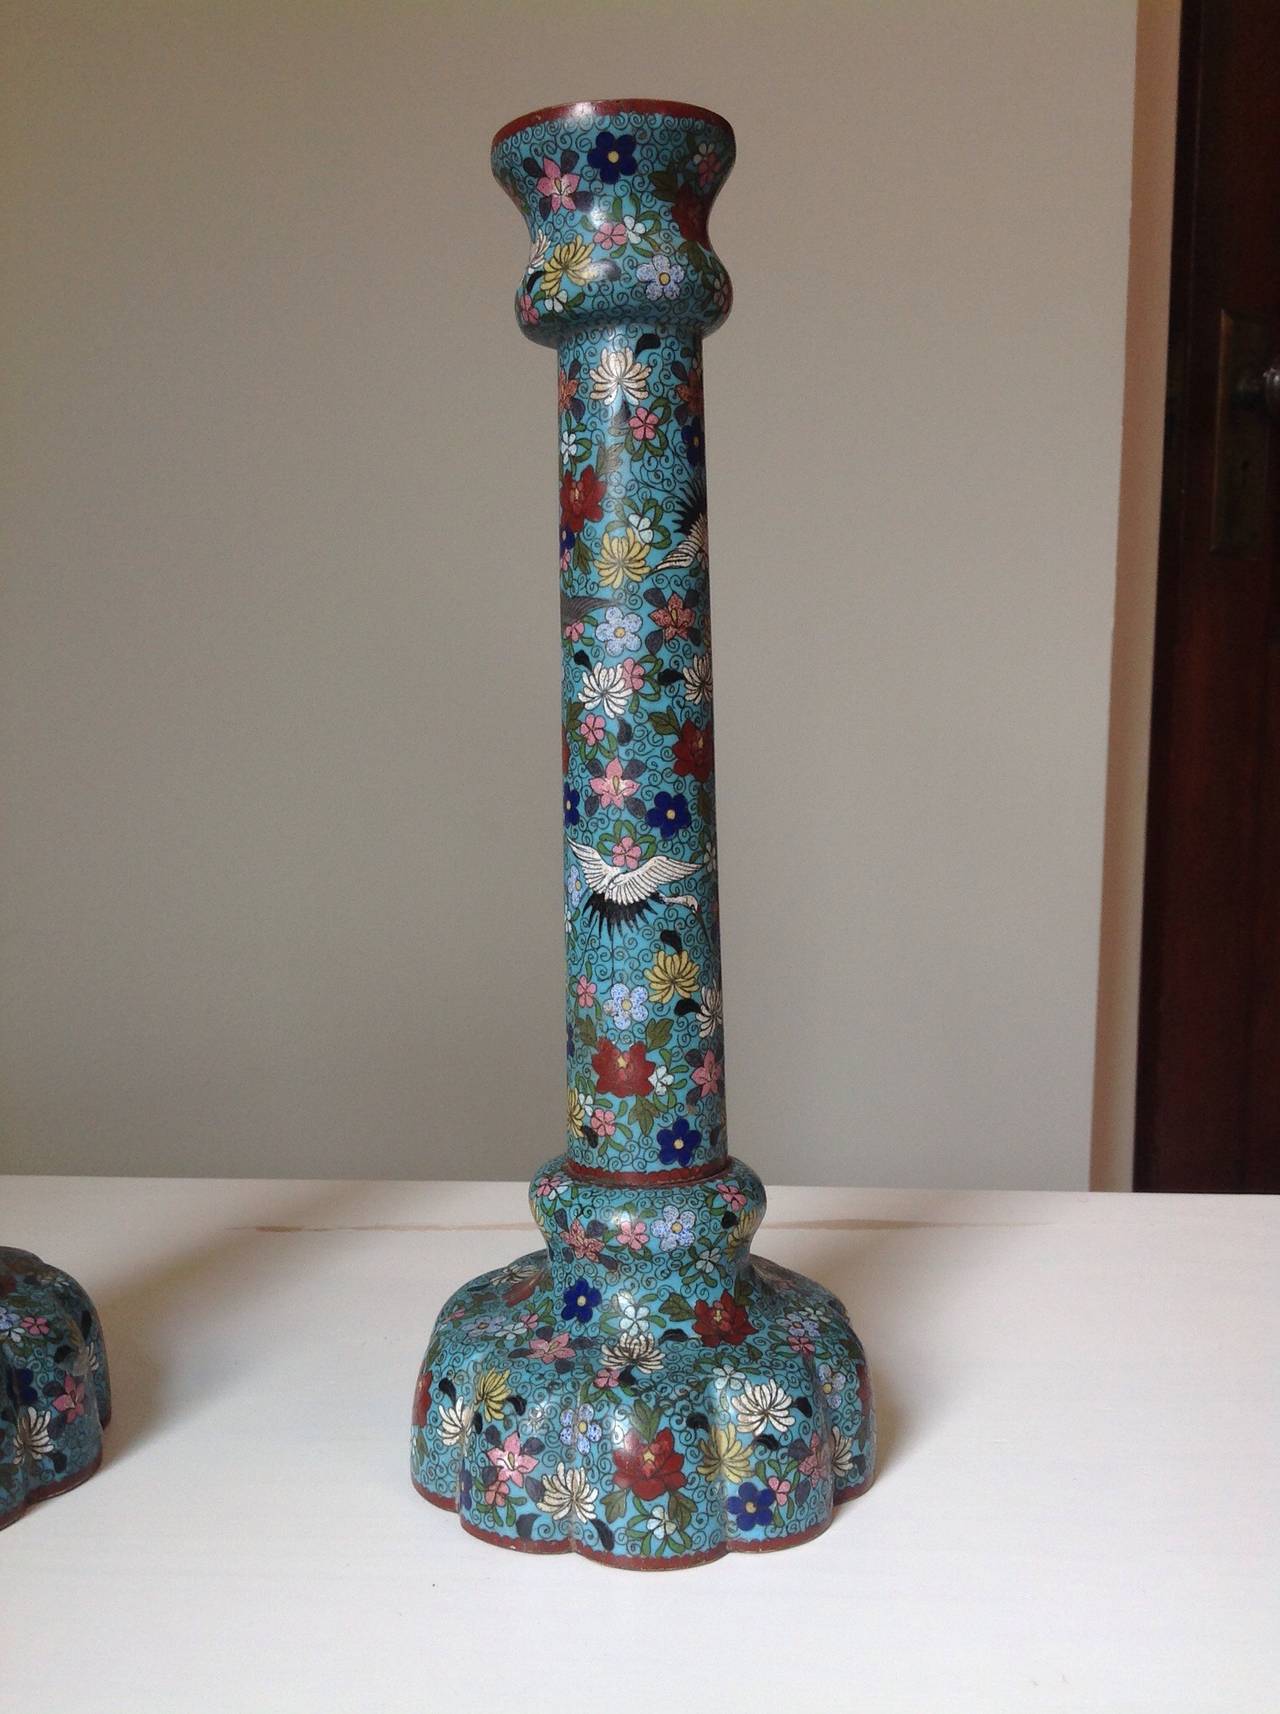 An unusual and very decorative pair of late 19th, early 20th century Chinese cloisonné́ enamel candlesticks with aqua blue background and intricate flower (chrysanthemums, roses, lotus etc...) and crane motif. The cloisonné́ work is beautifully